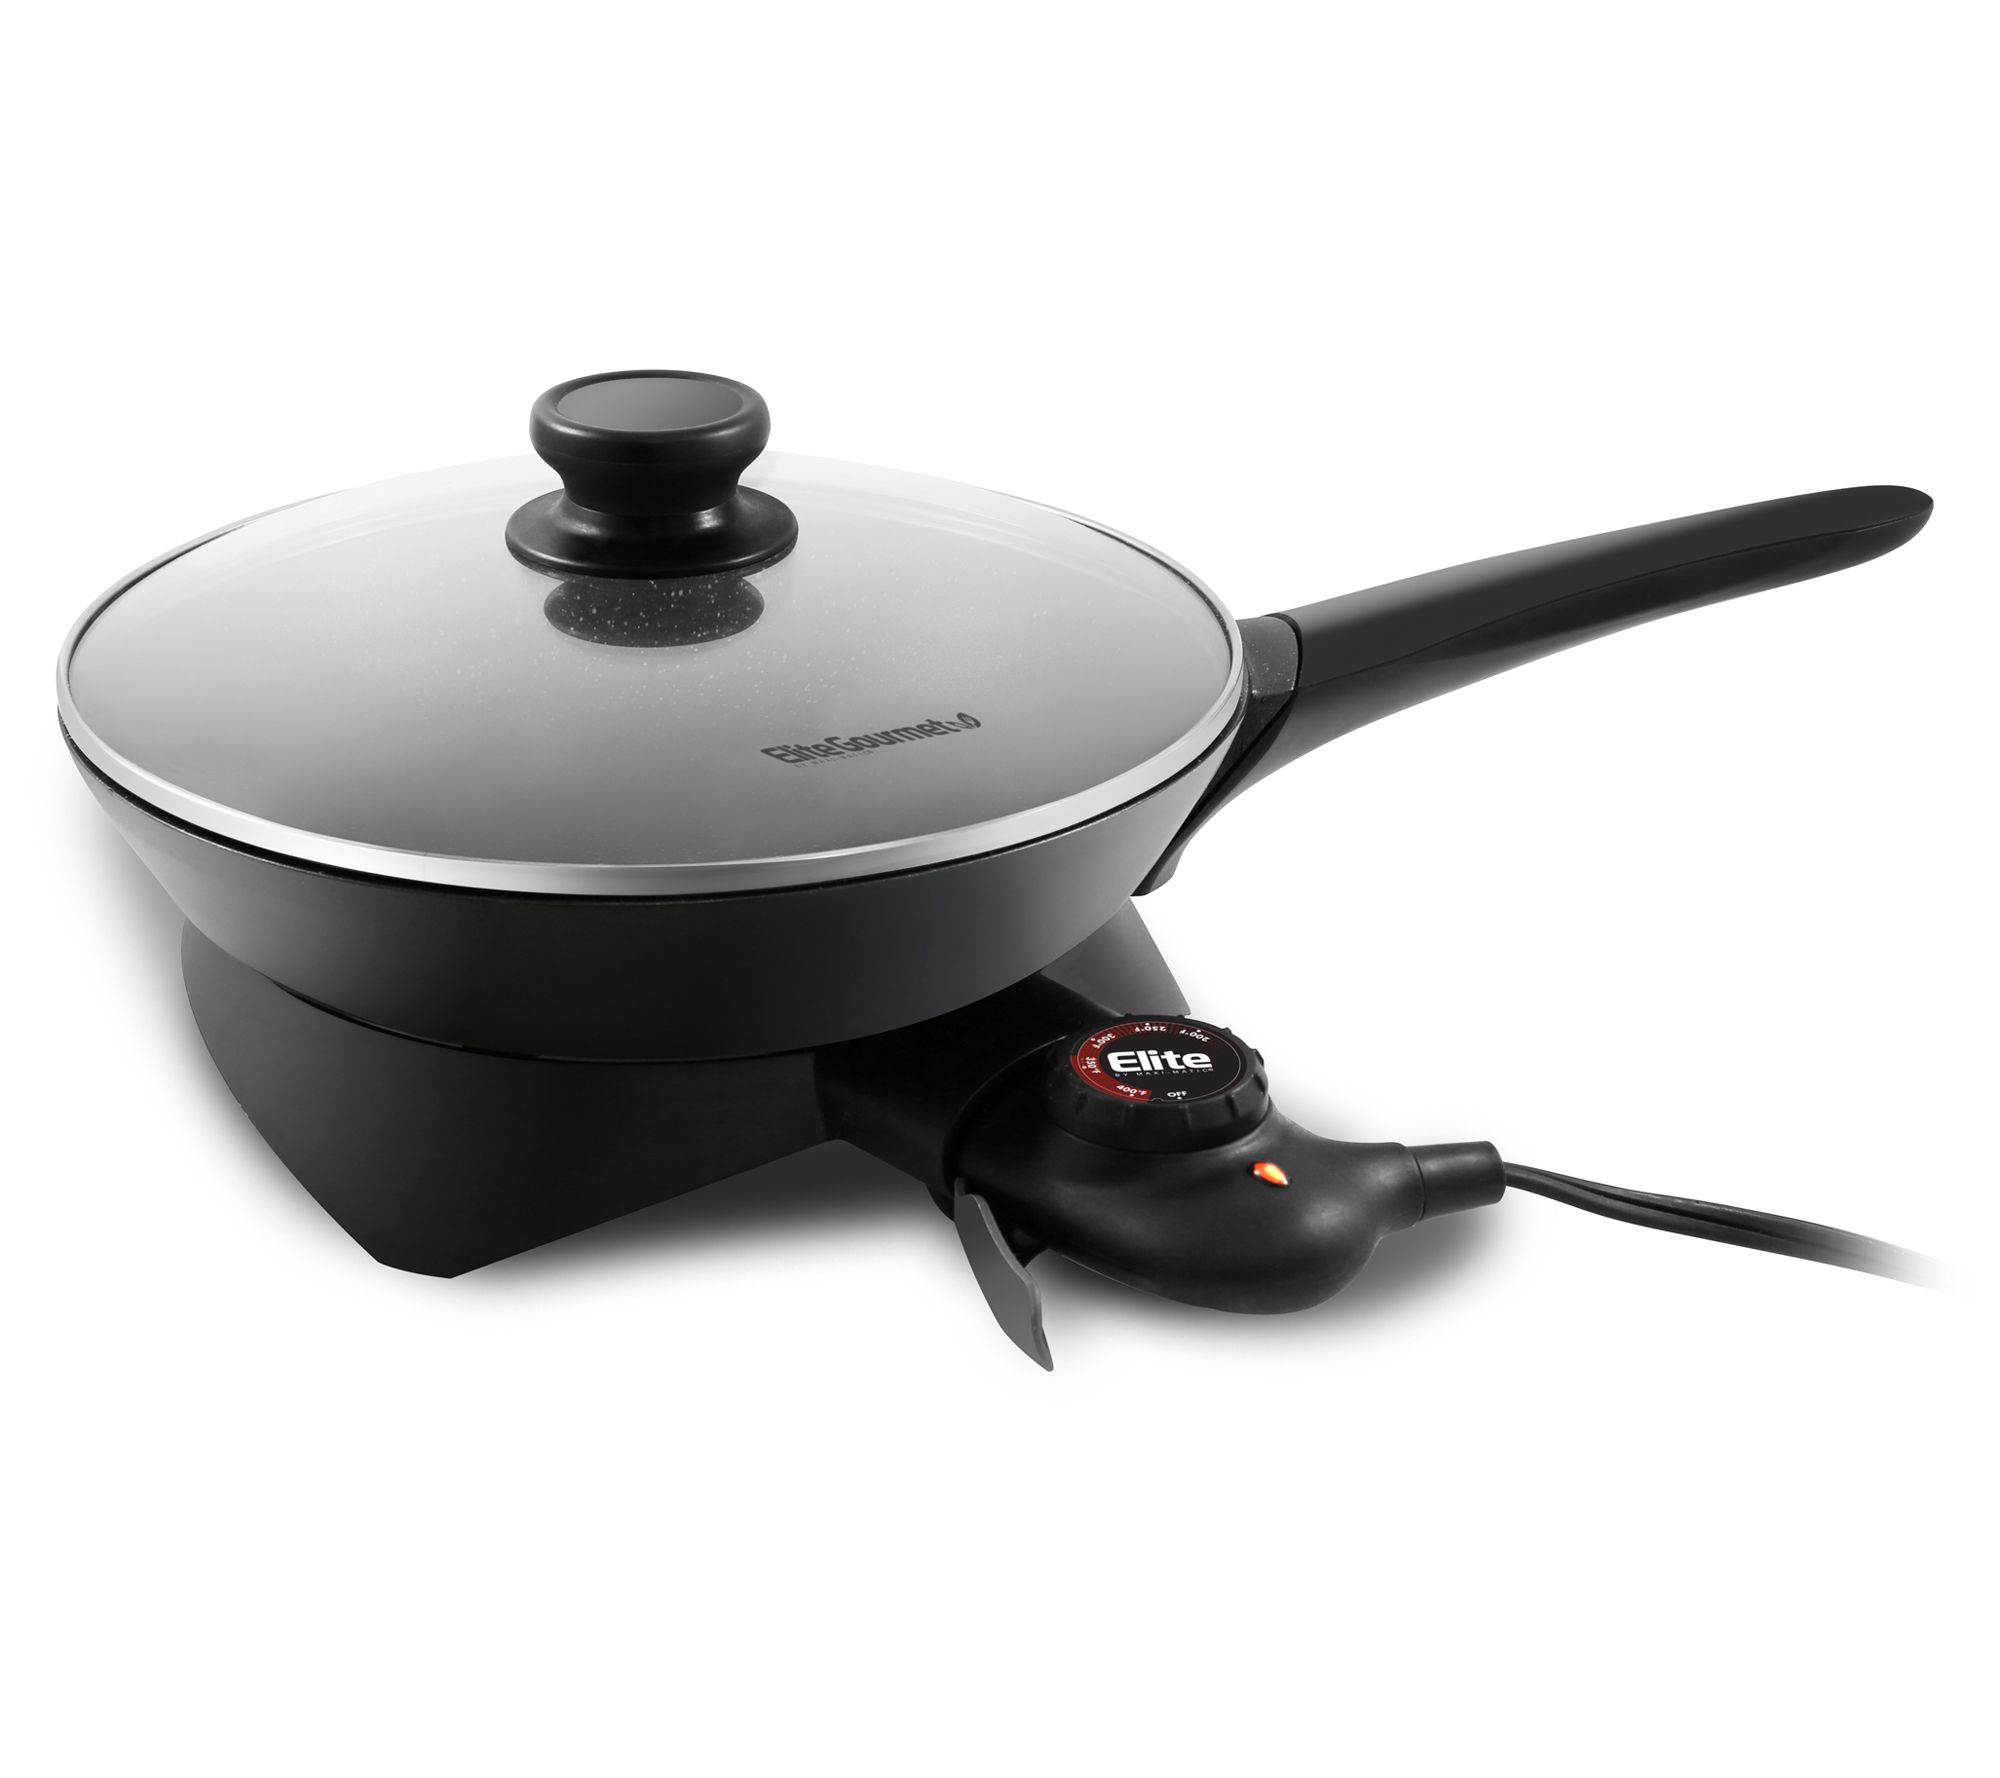 Elite by Maxi Matic Cuisine 7 Electric Skillet with Glass Lid